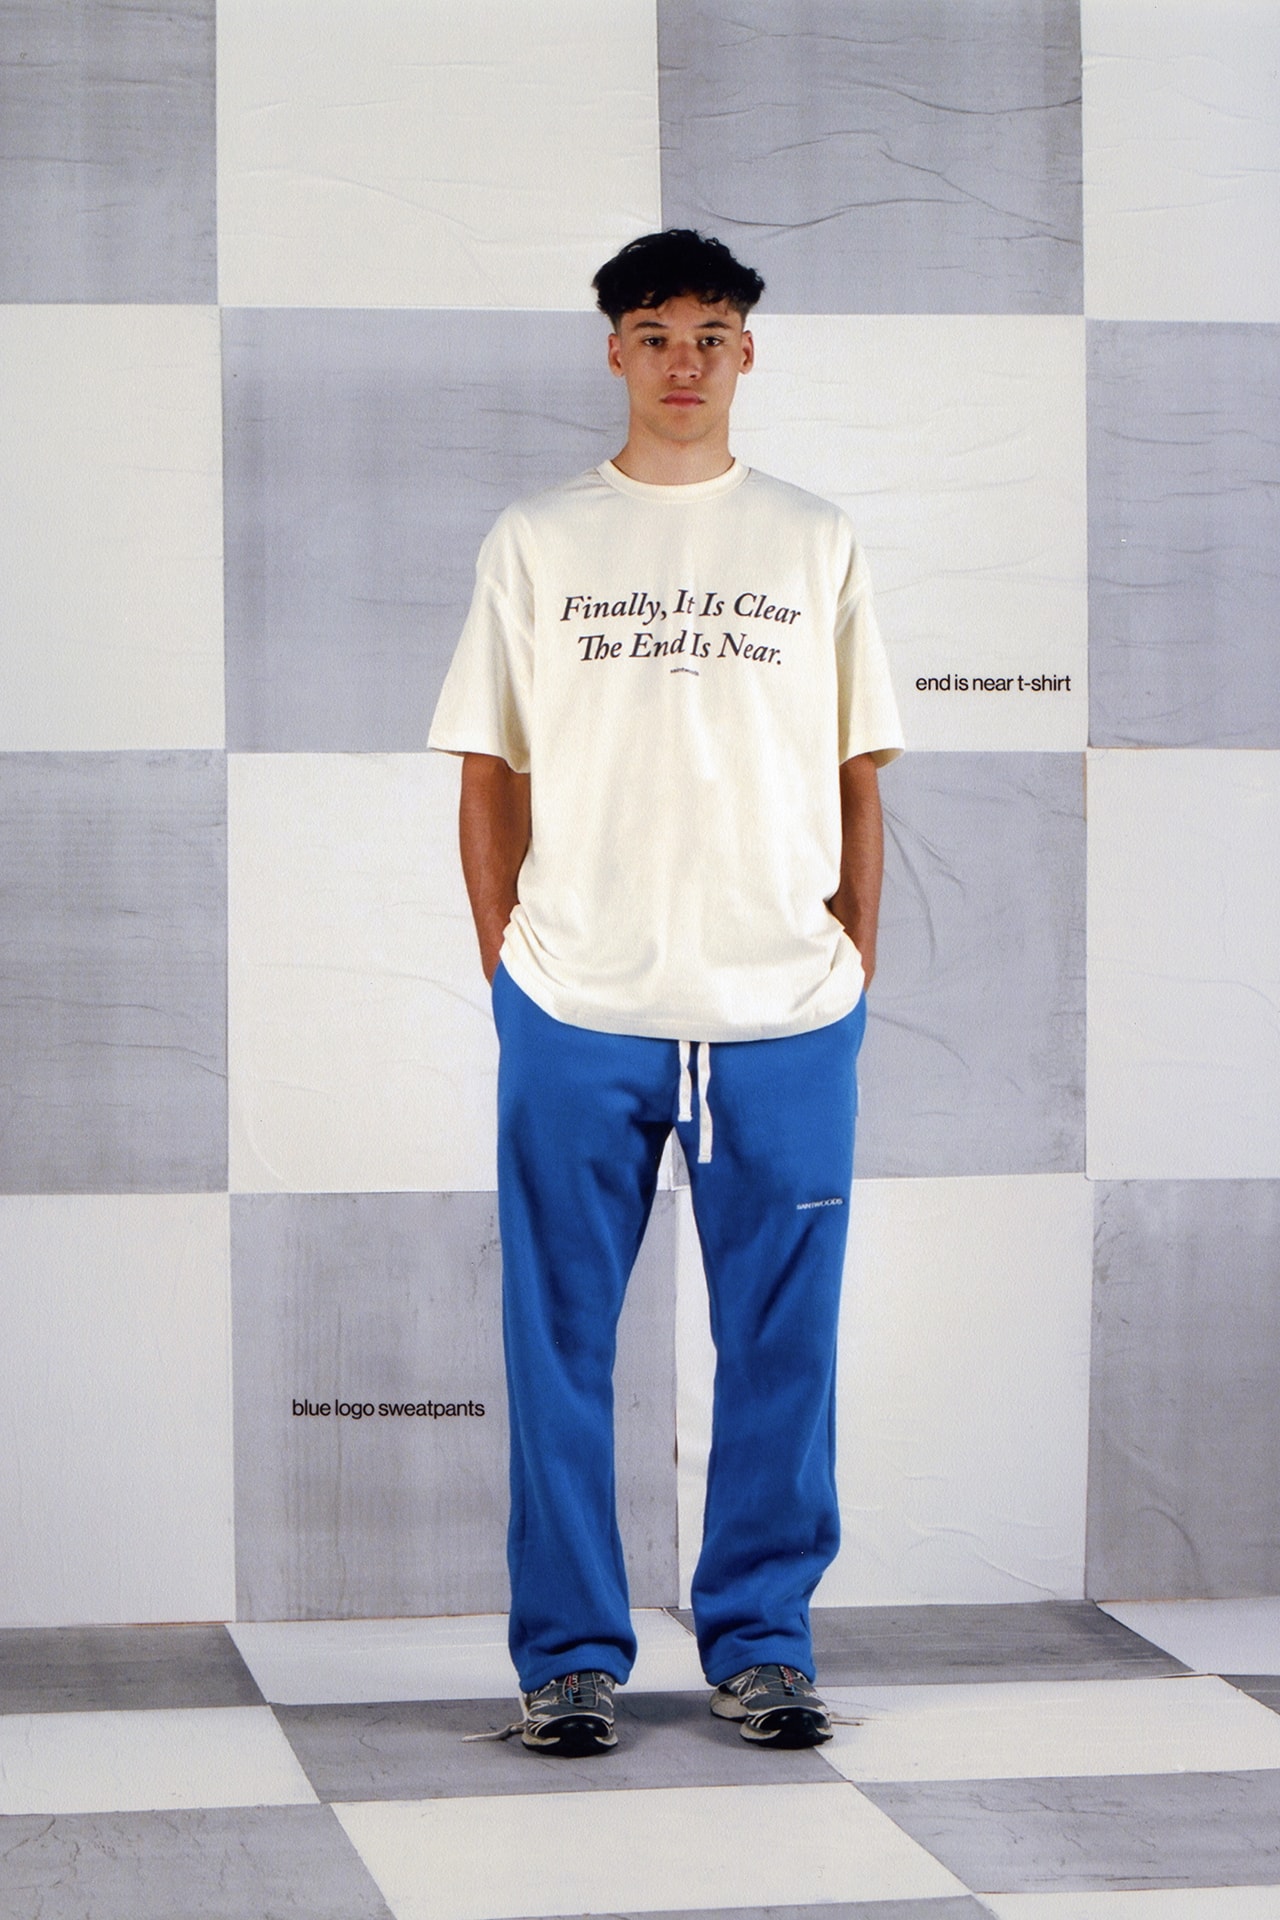 Saintwoods SW.013 SW013 Collection Lookbook Pop-Up Shop Montreal Canada Streetwear Brand Blue Sweat Pants T-Shirt Finally It Is Clear The End Is Near